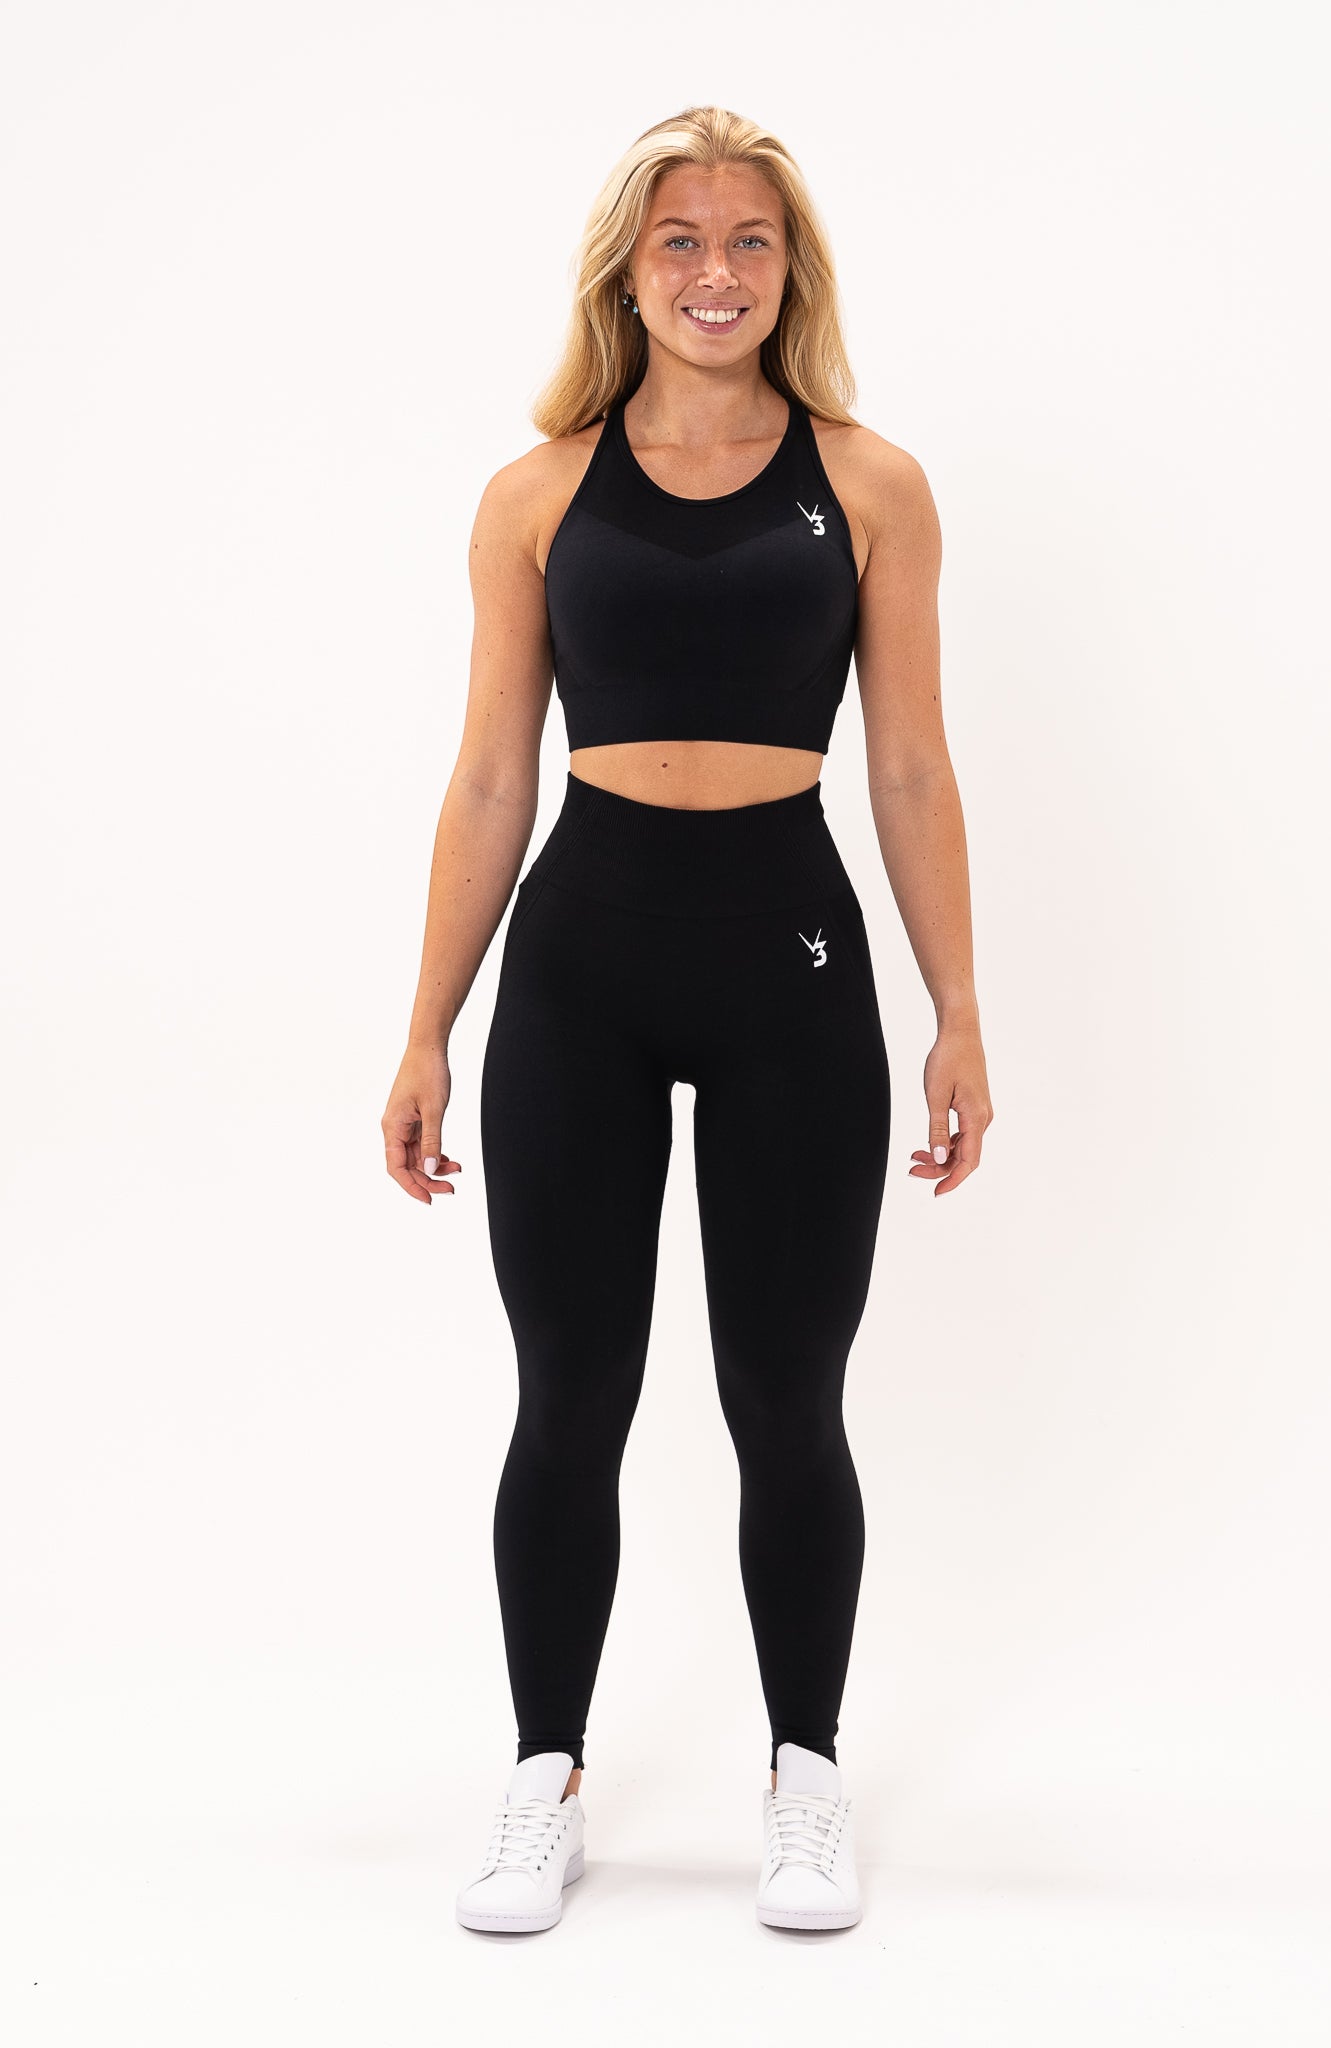 redbaysand Women's Tempo seamless scrunch bum shaping high waisted leggings and training sports bra in black – Squat proof sports tights and training bra for Gym workouts training, Running, yoga, bodybuilding and bikini fitness.